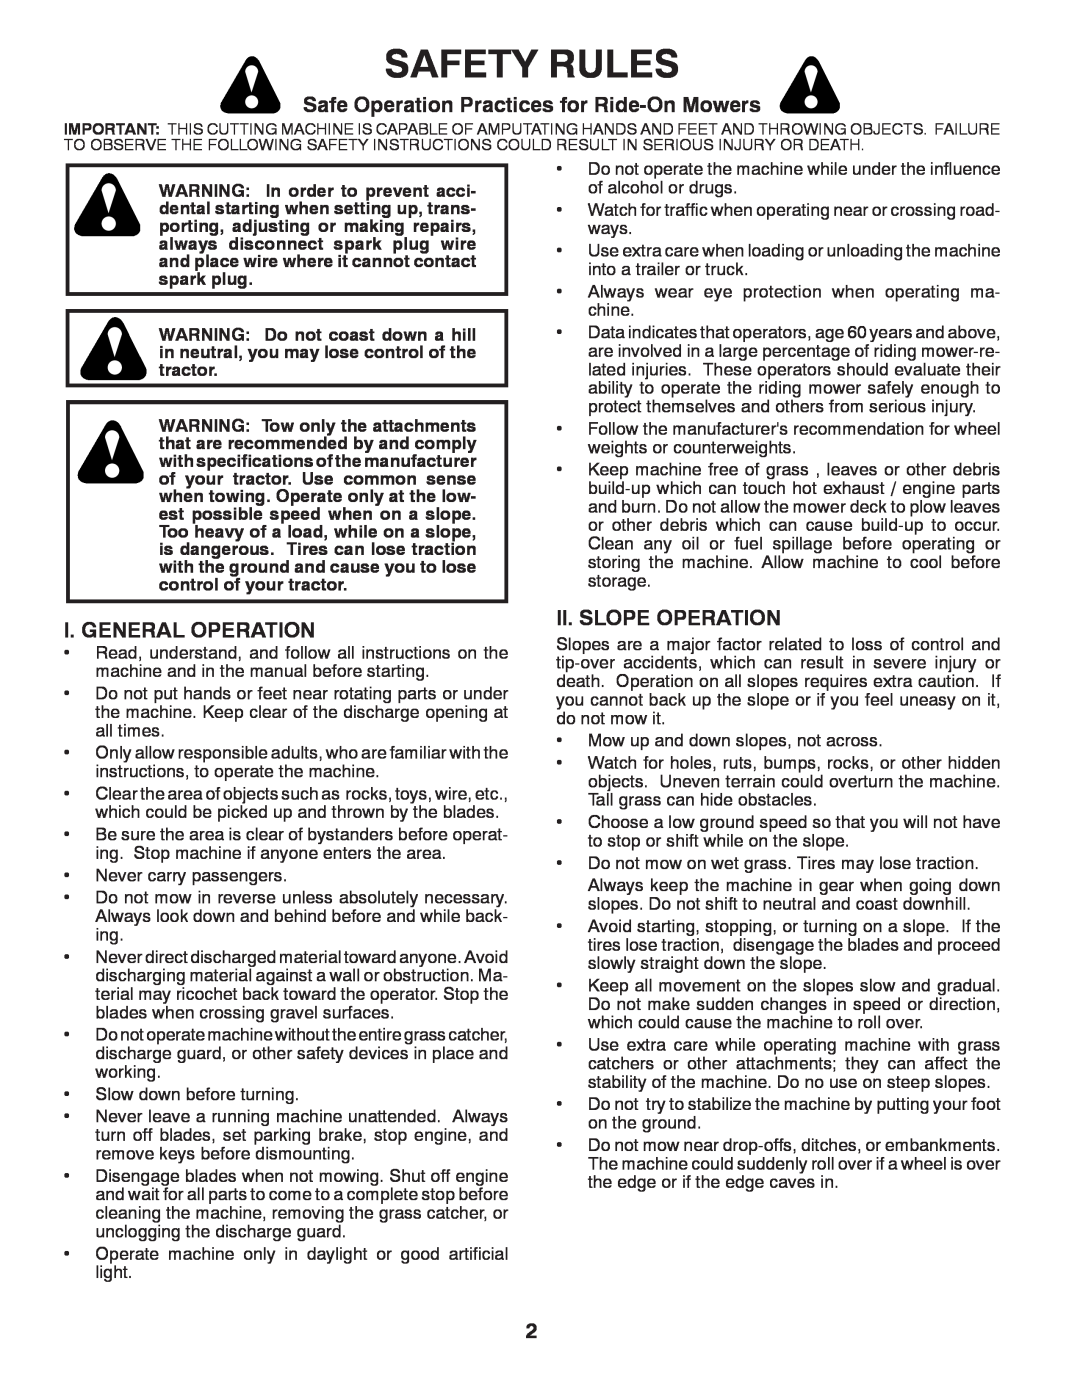 McCulloch 532 40 80-72 manual Safety Rules, Safe Operation Practices for Ride-On Mowers, I. General Operation 